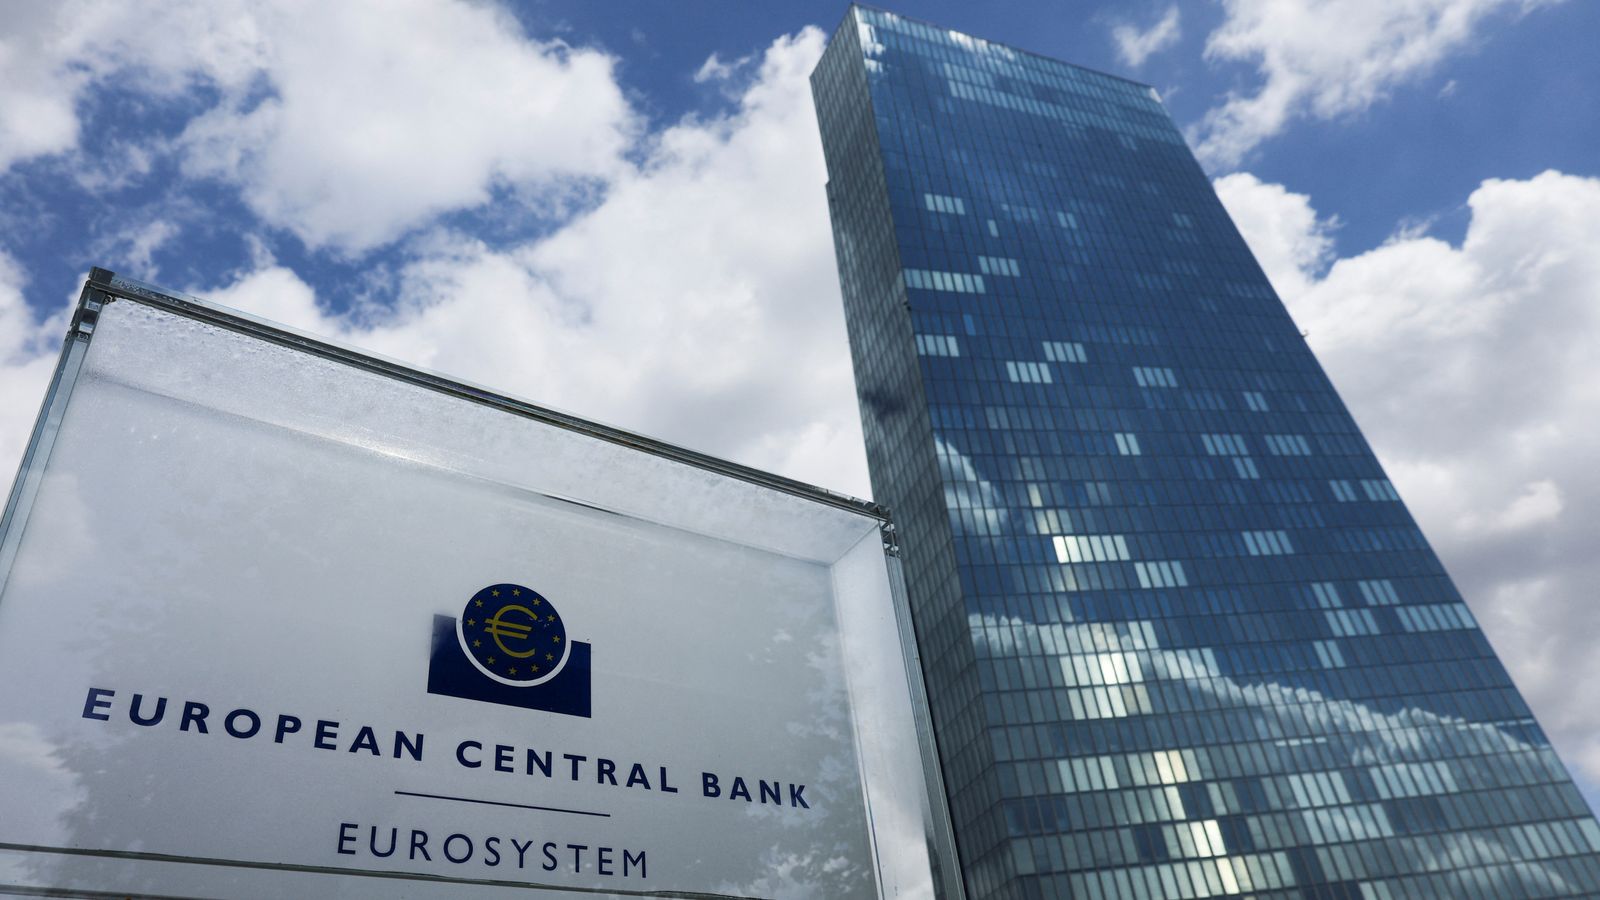 Sharp rate rise by European Central Bank may force Bank of England to follow suit